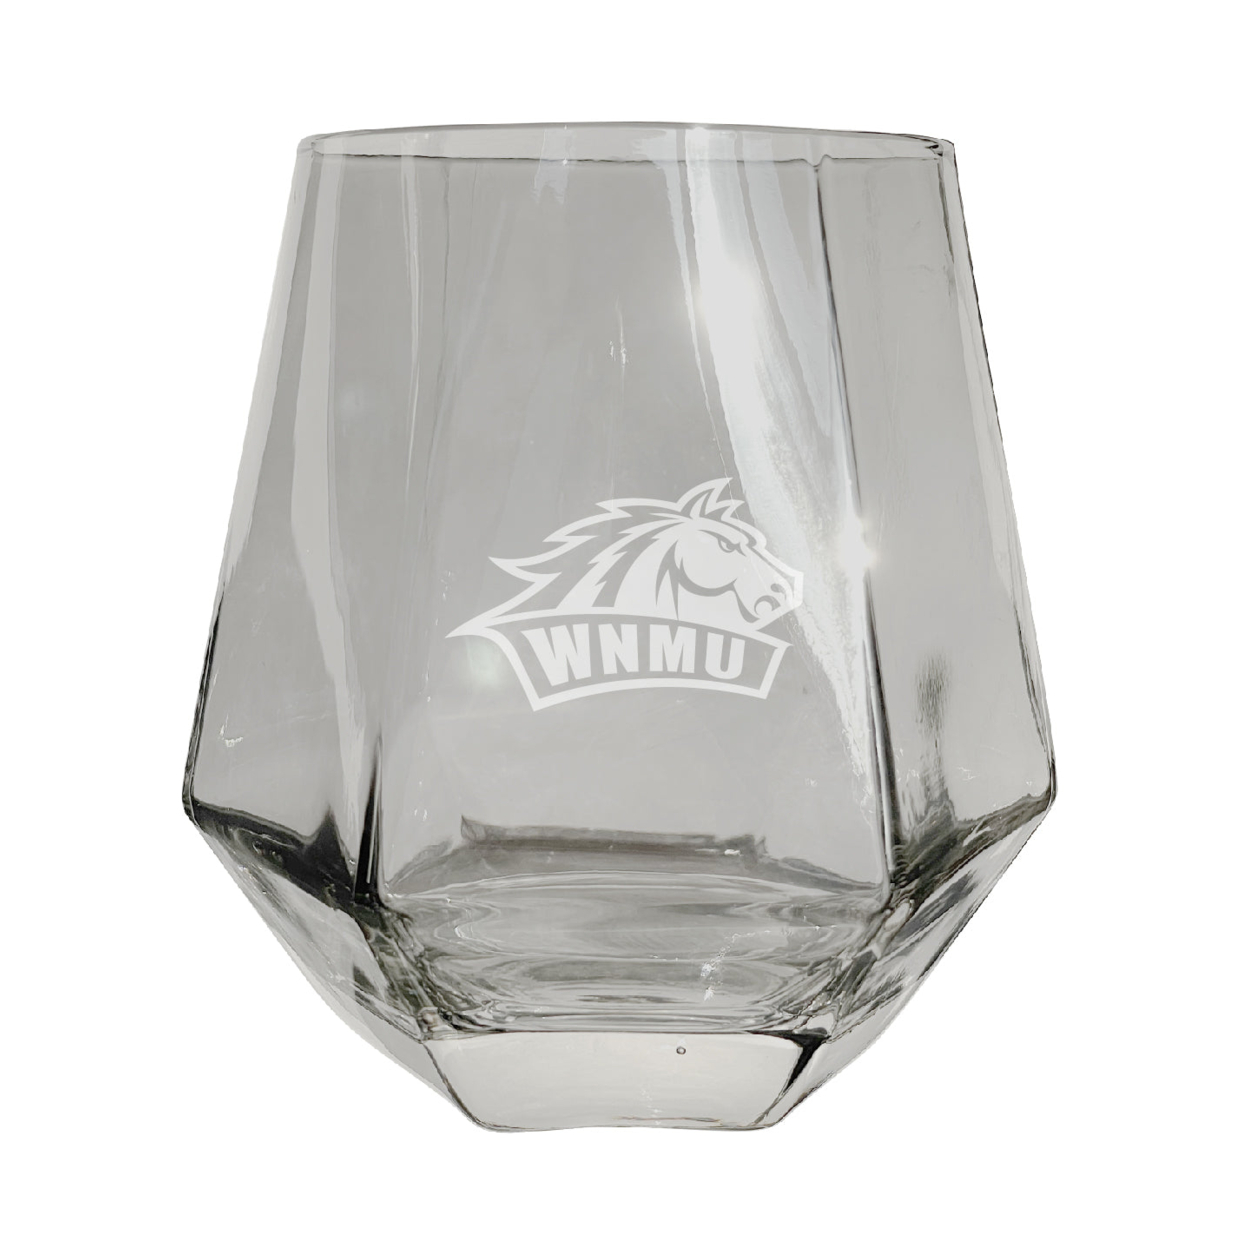 Western New Mexico University Etched Diamond Cut Stemless 10 Ounce Wine Glass Clear